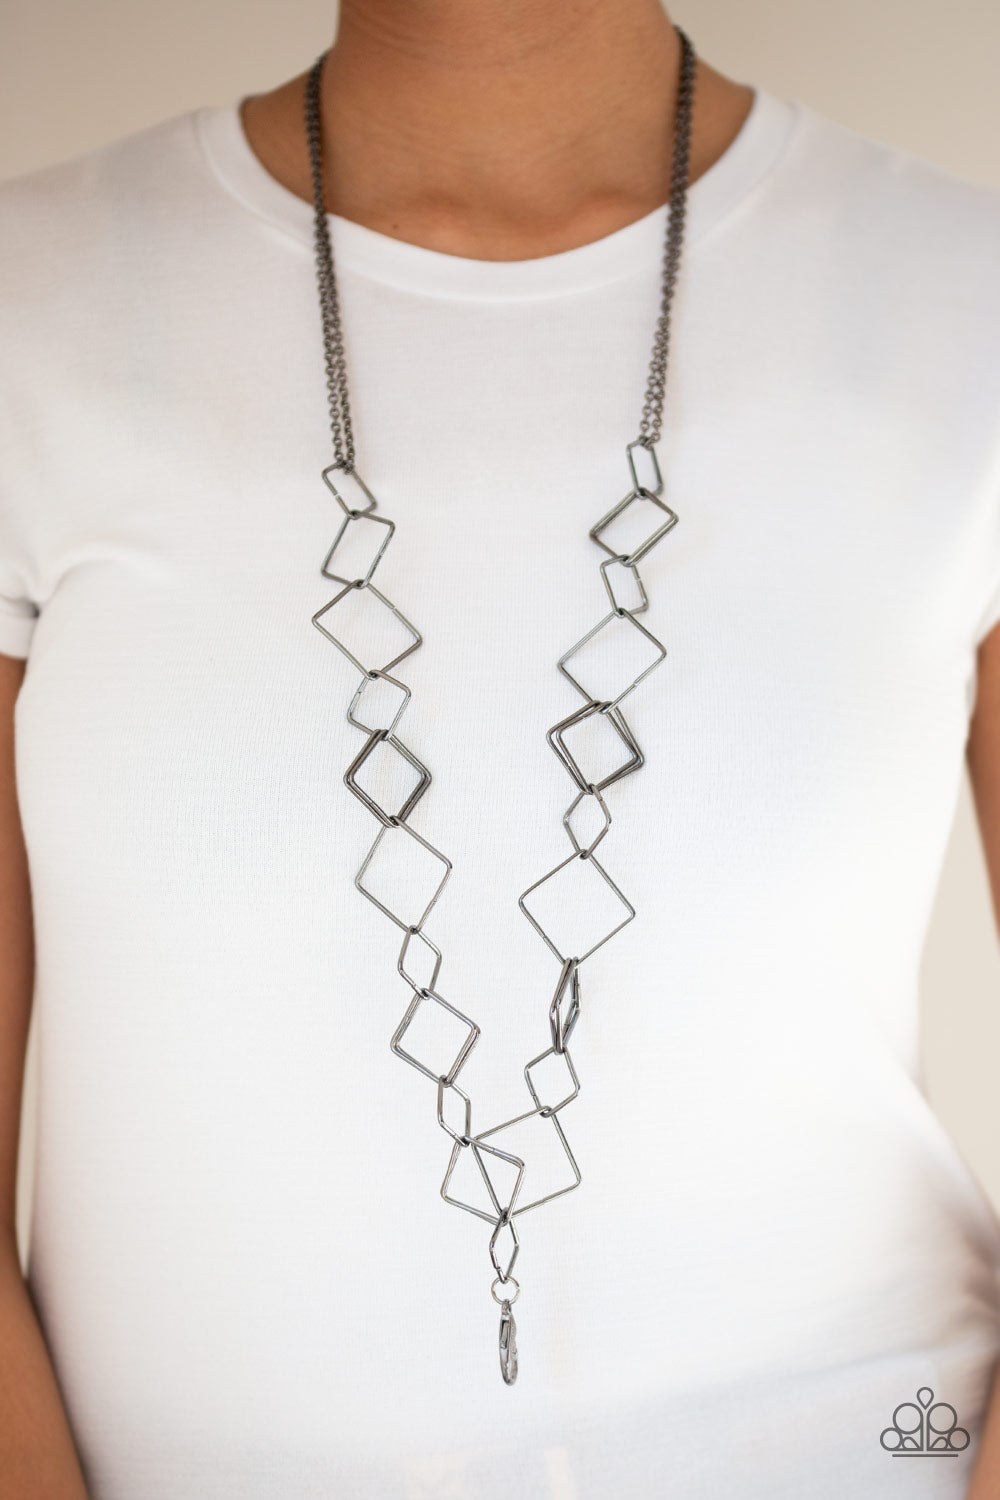 Paparazzi Backed Into A Corner - Black - Lanyard Necklace and matching Earrings - $5 Jewelry With Ashley Swint